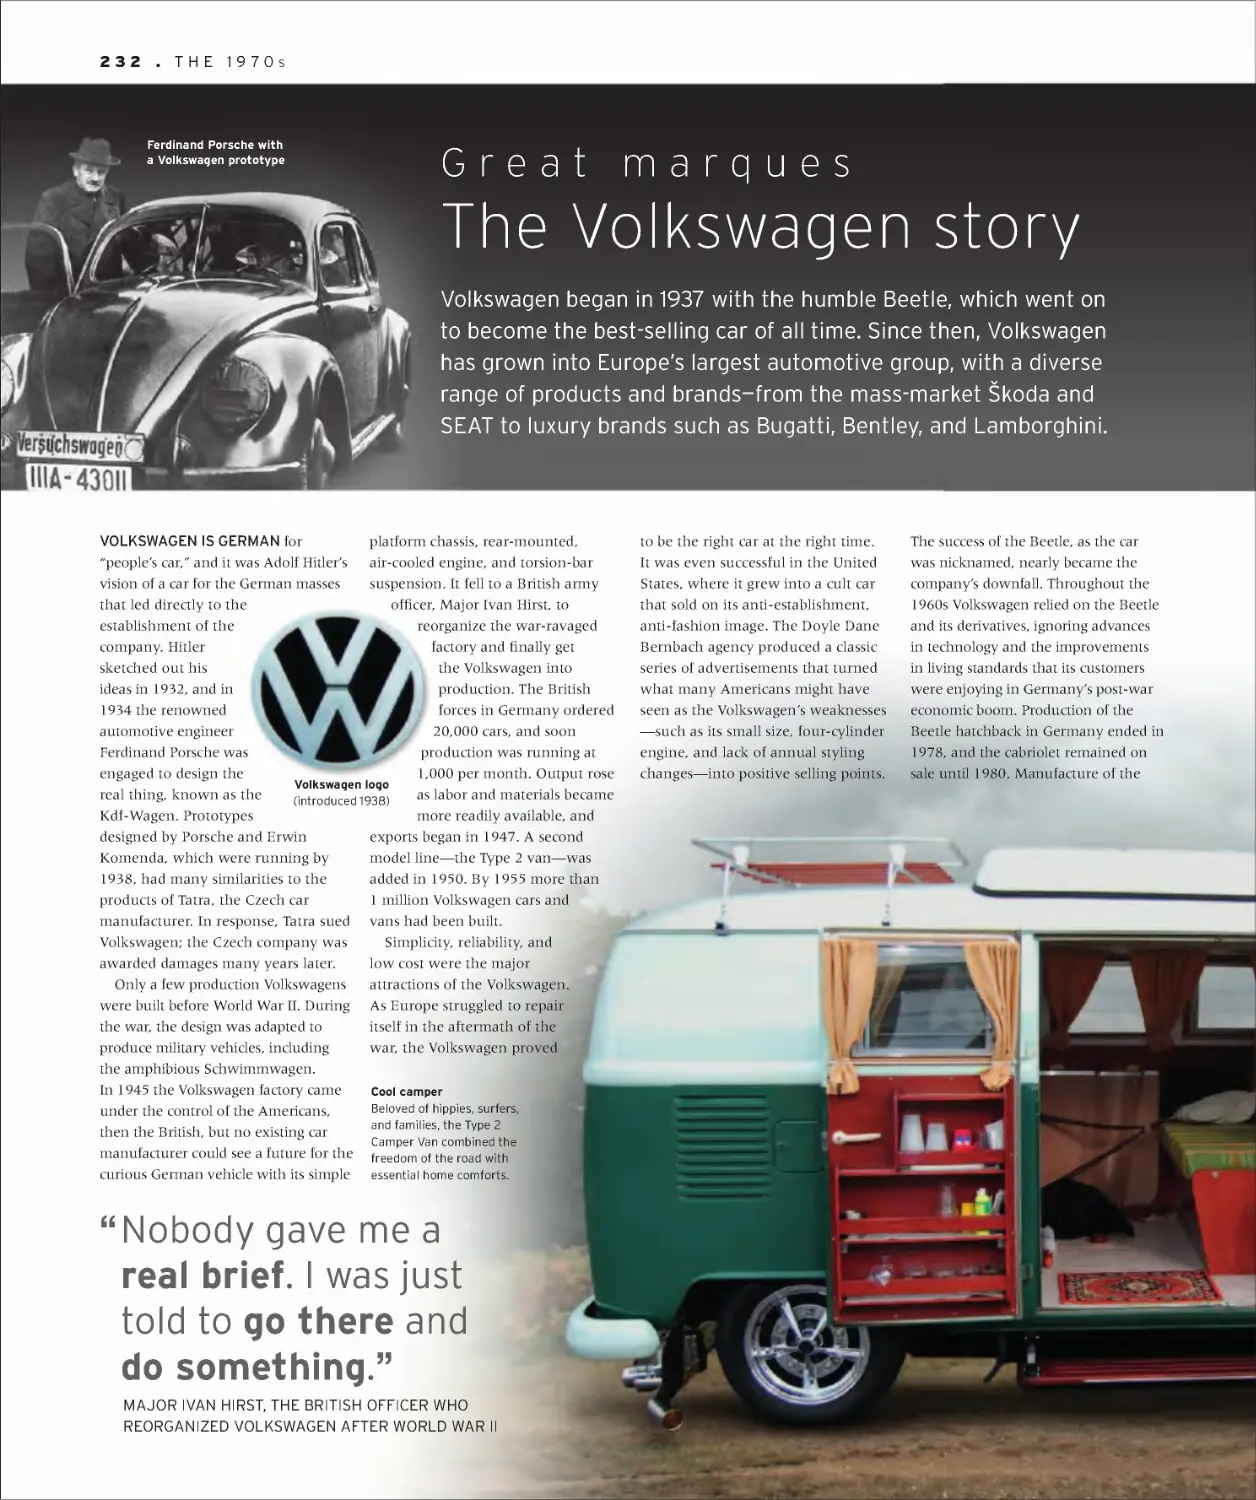 Great marques: The Volkswagen story 232